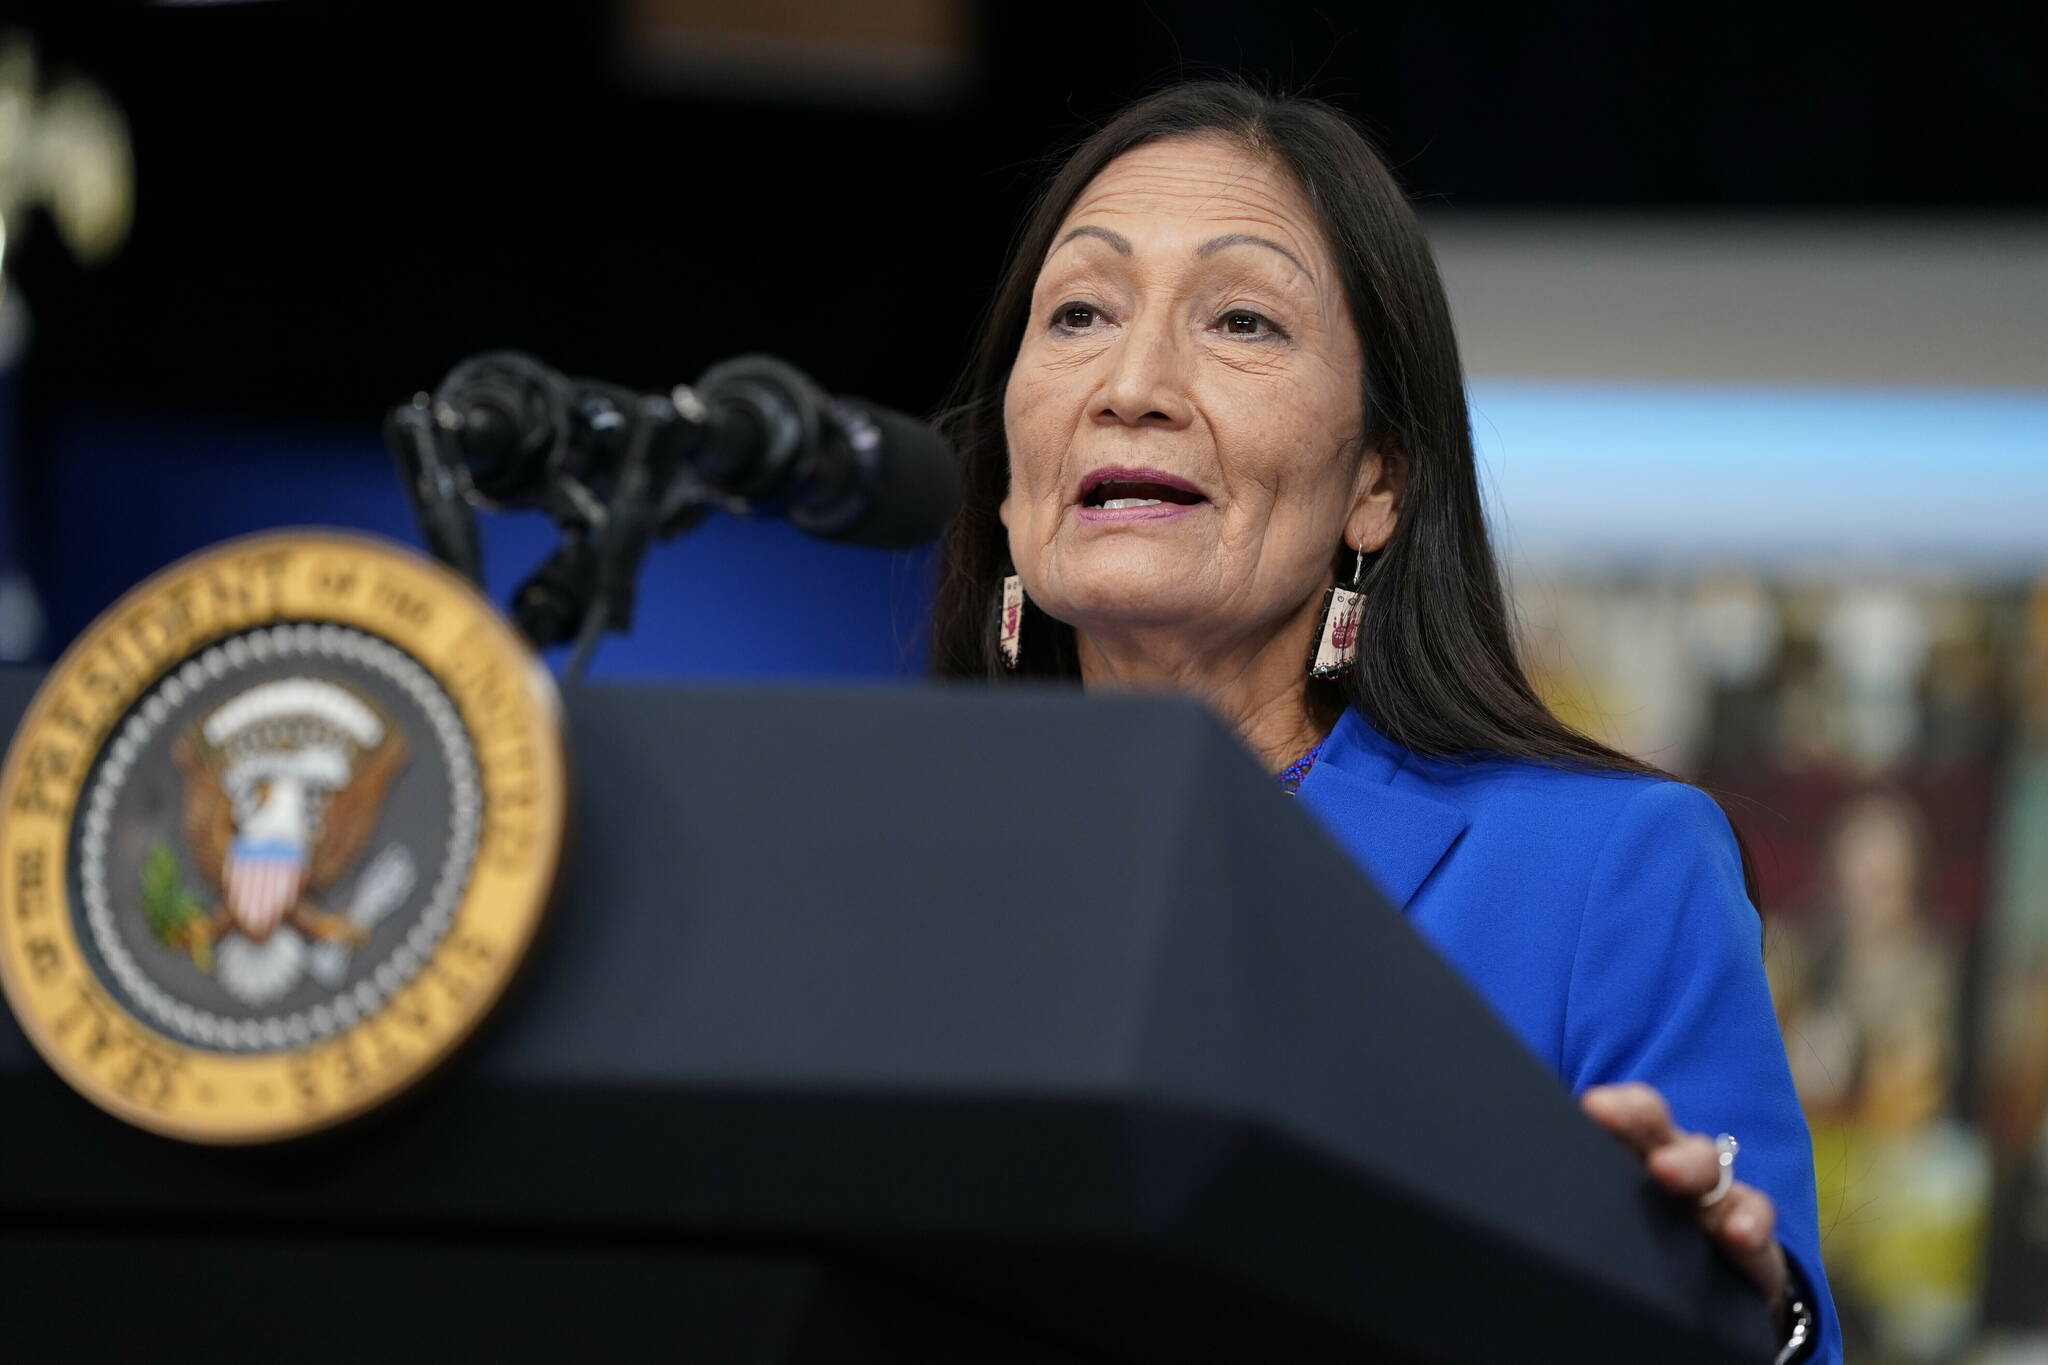 Interior Secretary Deb Haaland speaks during a Tribal Nations Summit during Native American Heritage Month, in the South Court Auditorium on the White House campus, on Nov. 15, 2021, in Washington. Haaland on Thursday, May 5, 2022, announced the members of a commission that will craft recommendations on how the federal government can better tackle unsolved cases in which Native Americans and Alaska Natives have gone missing or have been killed. (AP Photo/Evan Vucci, File)